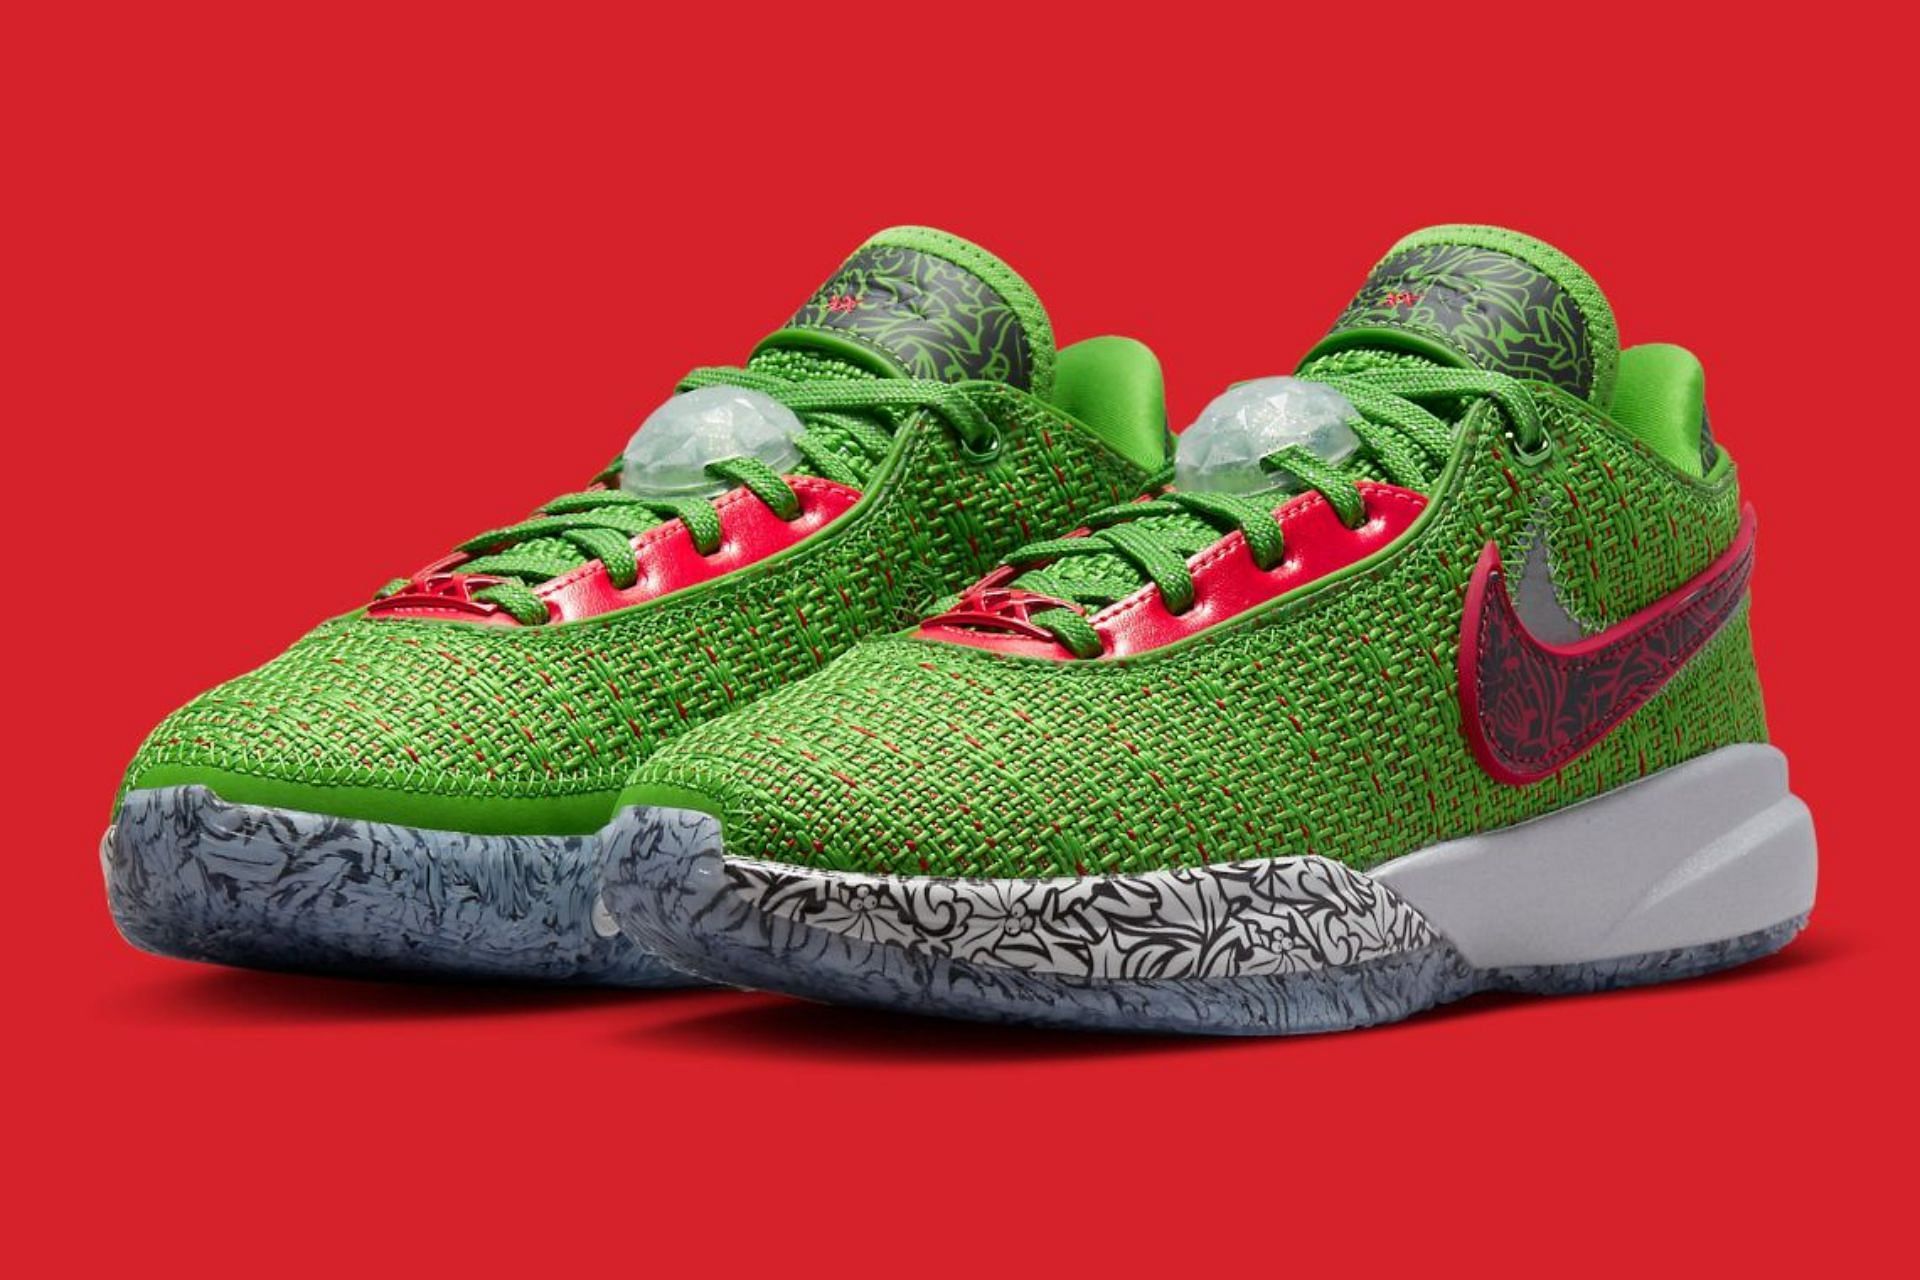 Where to buy Nike LeBron 20 “Christmas” GS shoes? Price and more